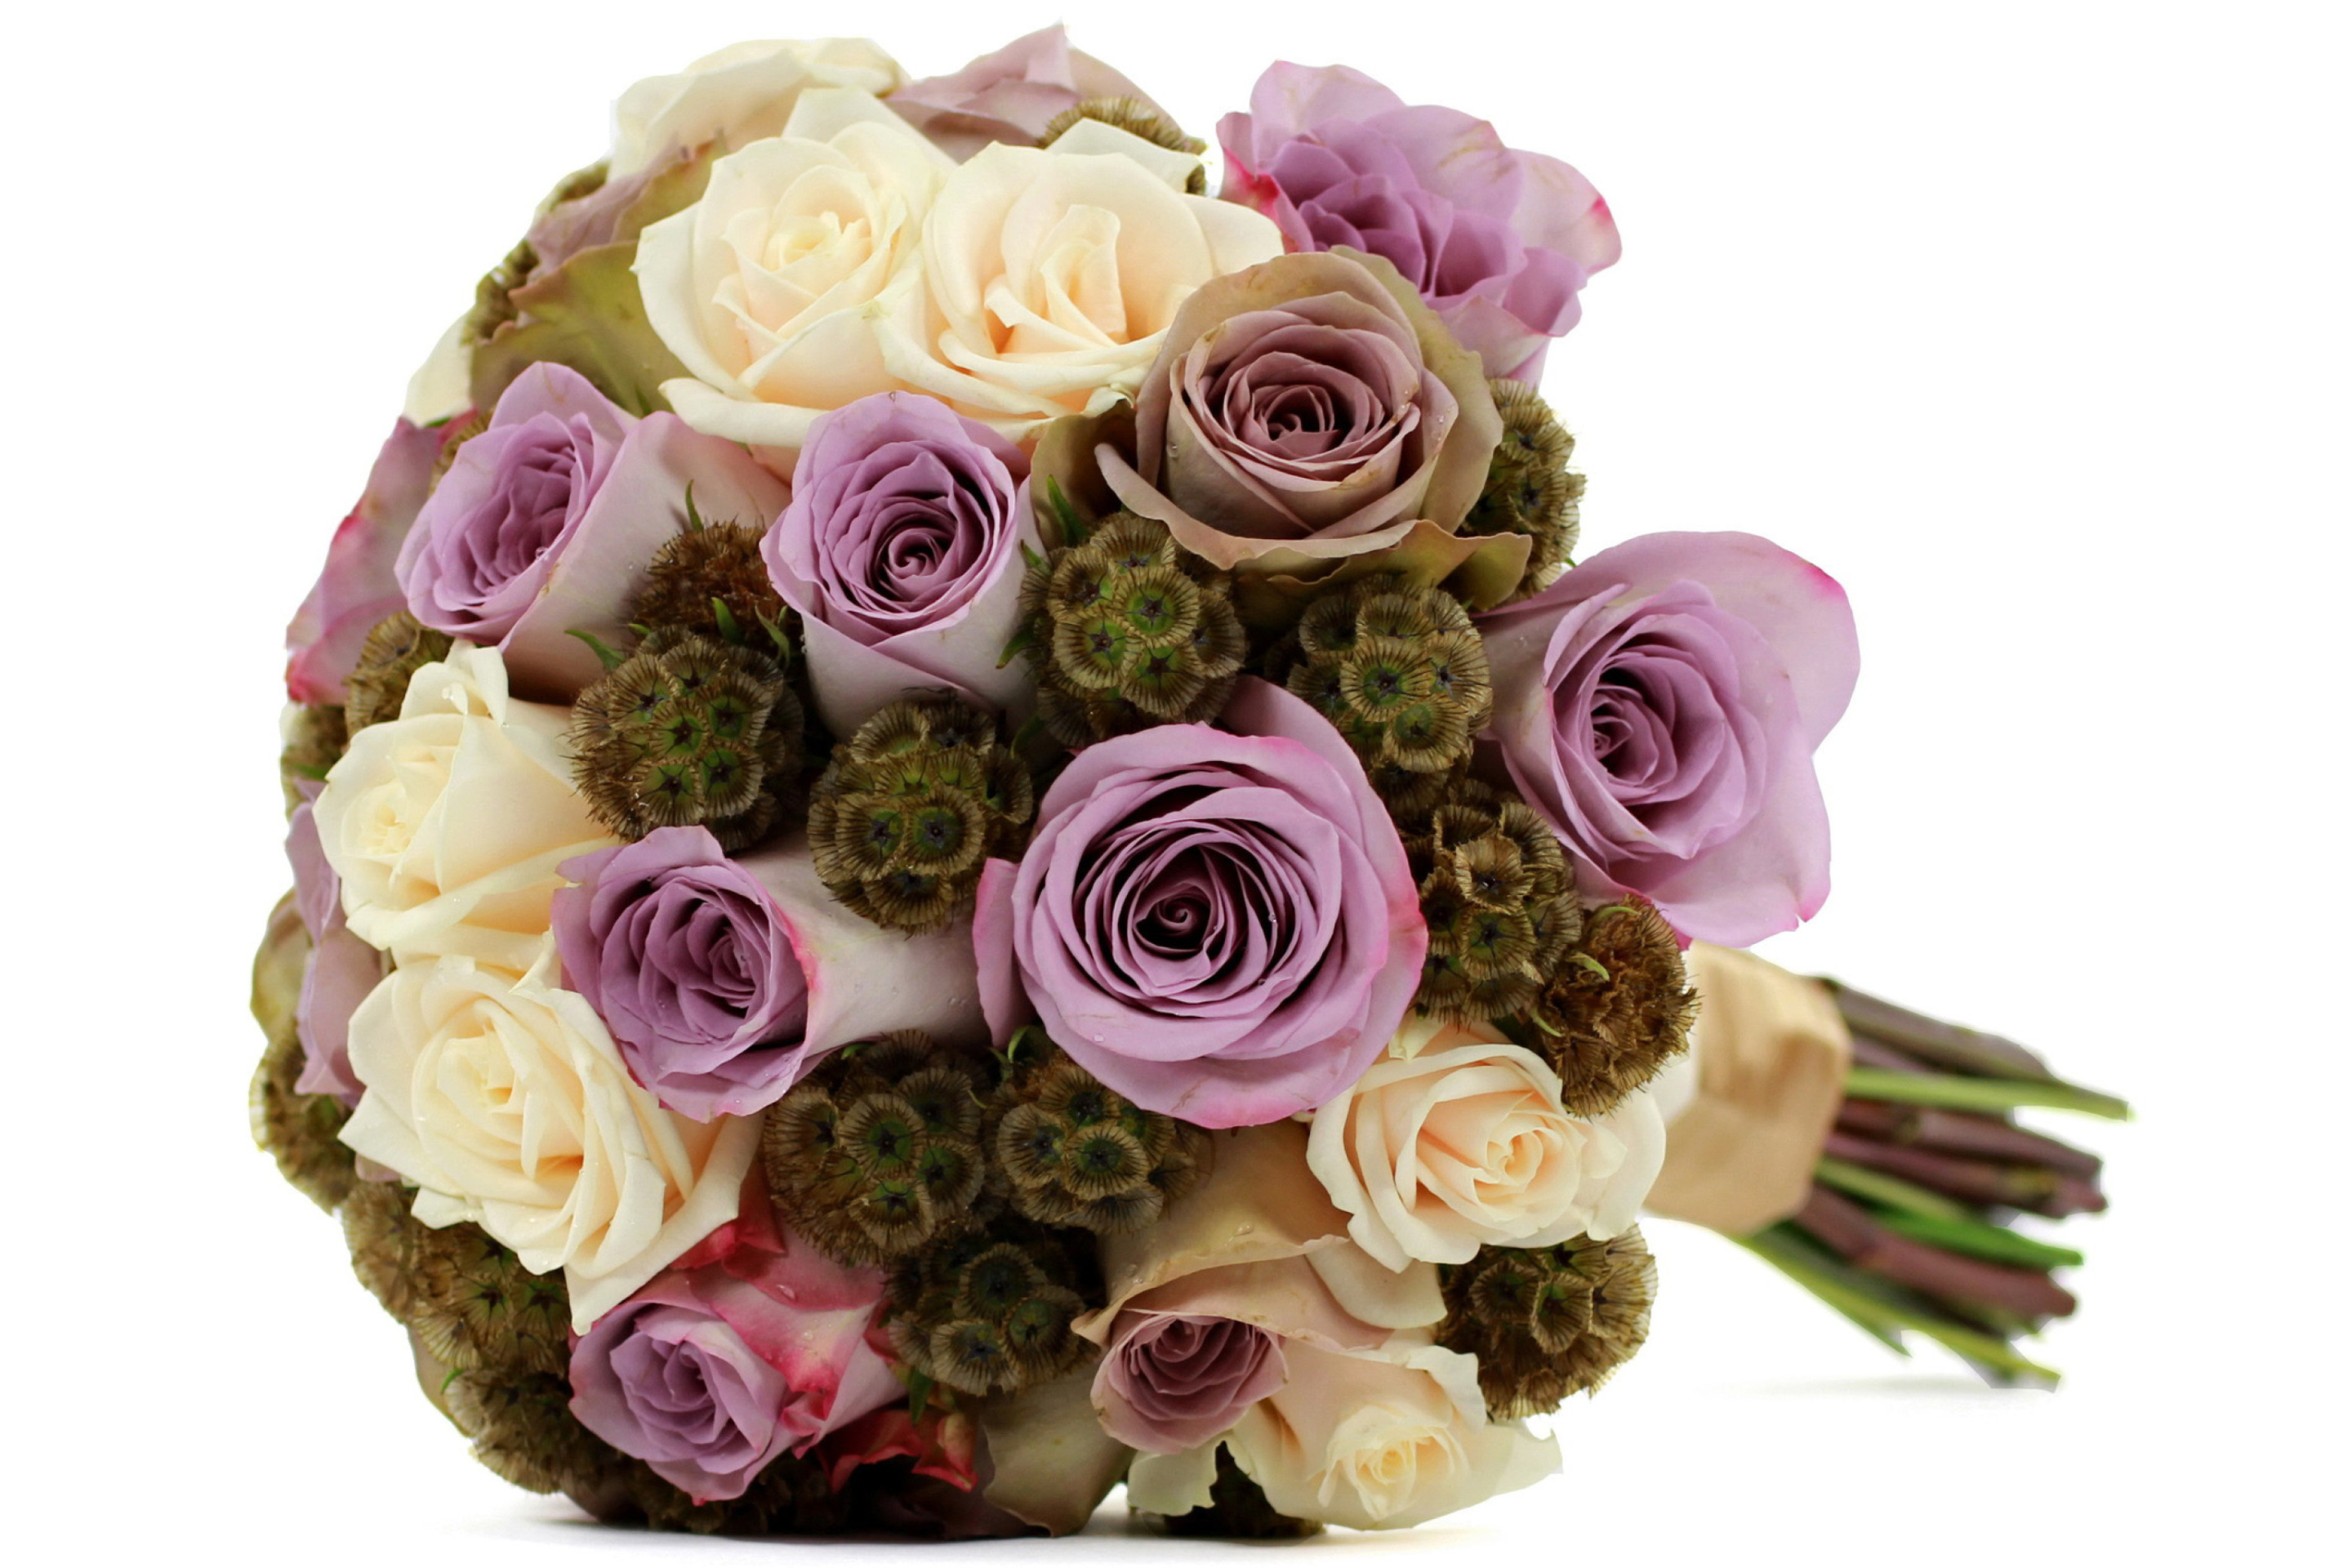 Bouquet with lilac roses screenshot #1 2880x1920